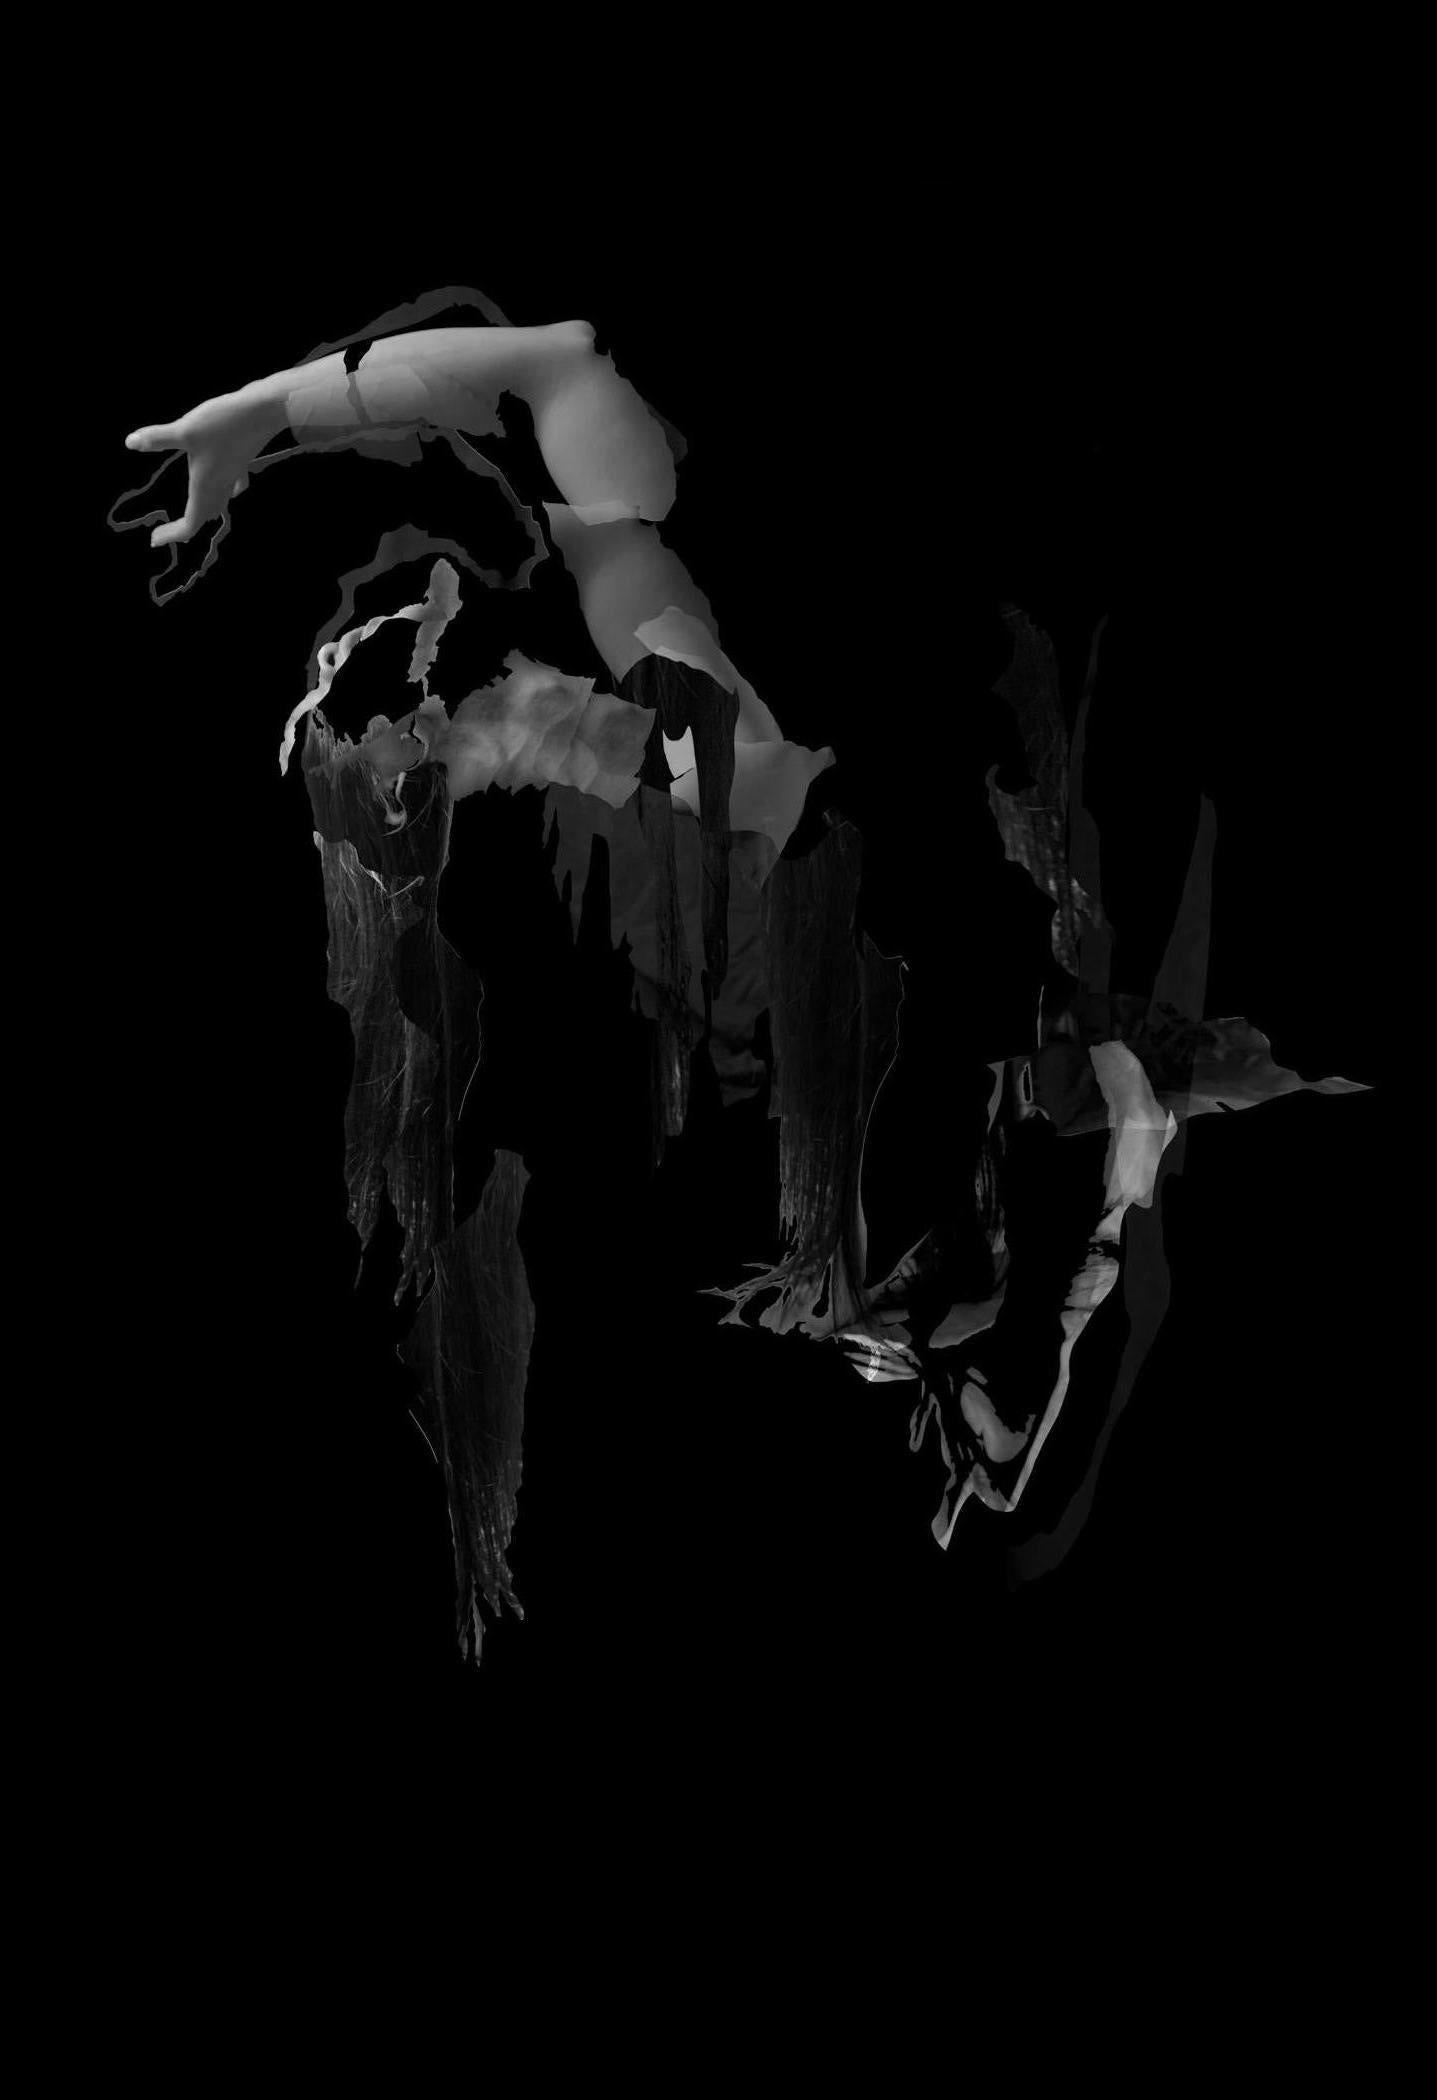 Ying Chen Black and White Photograph - Fragmented-Untitled 4. figurative Black and white  limited edition photograph